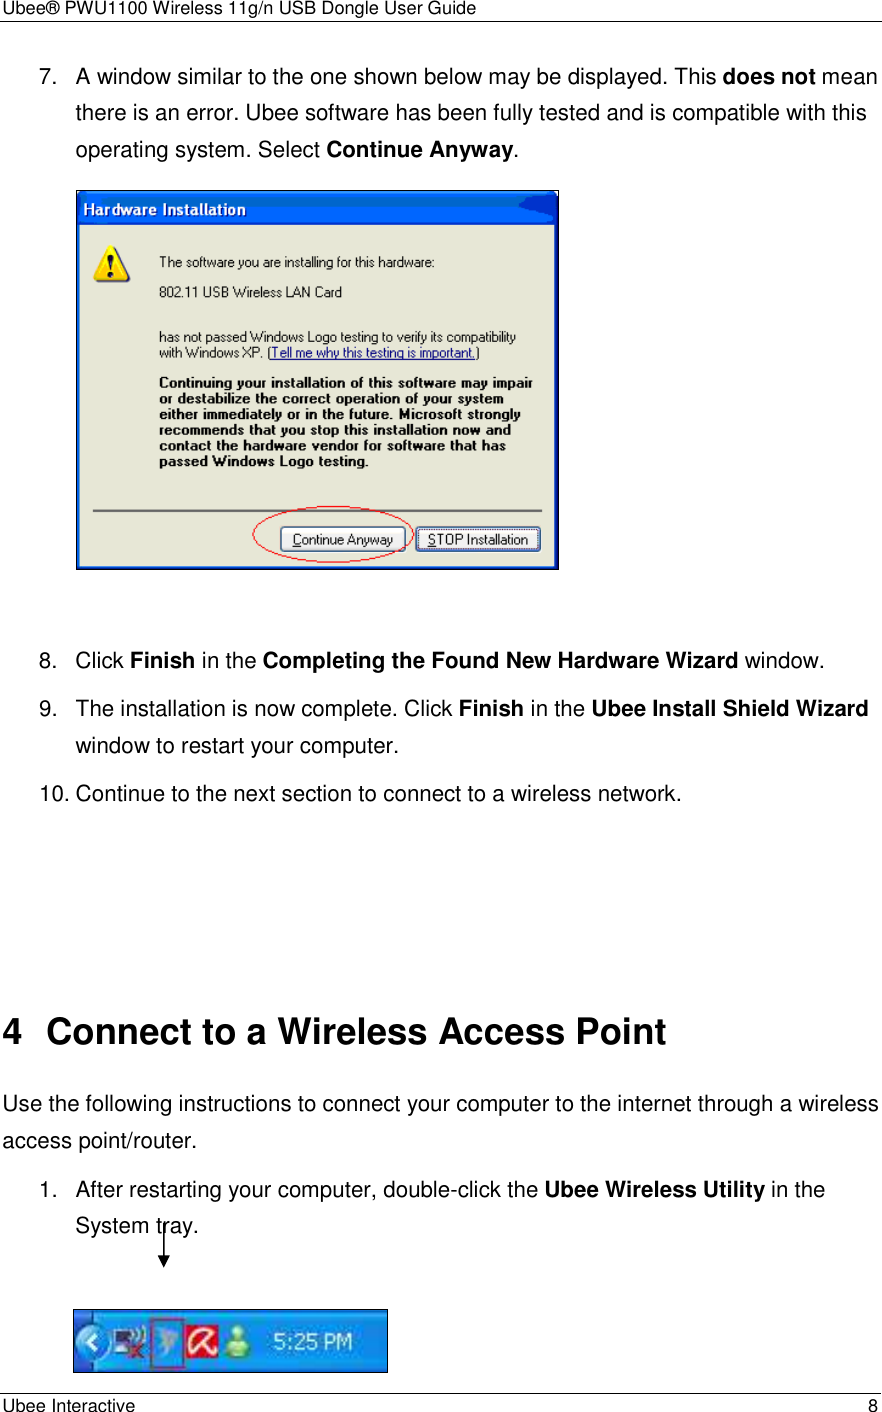 Ubee® PWU1100 Wireless 11g/n USB Dongle User Guide Ubee Interactive    8 7.  A window similar to the one shown below may be displayed. This does not mean there is an error. Ubee software has been fully tested and is compatible with this operating system. Select Continue Anyway.   8.  Click Finish in the Completing the Found New Hardware Wizard window. 9.  The installation is now complete. Click Finish in the Ubee Install Shield Wizard window to restart your computer. 10. Continue to the next section to connect to a wireless network.      4  Connect to a Wireless Access Point Use the following instructions to connect your computer to the internet through a wireless access point/router. 1.  After restarting your computer, double-click the Ubee Wireless Utility in the System tray.         